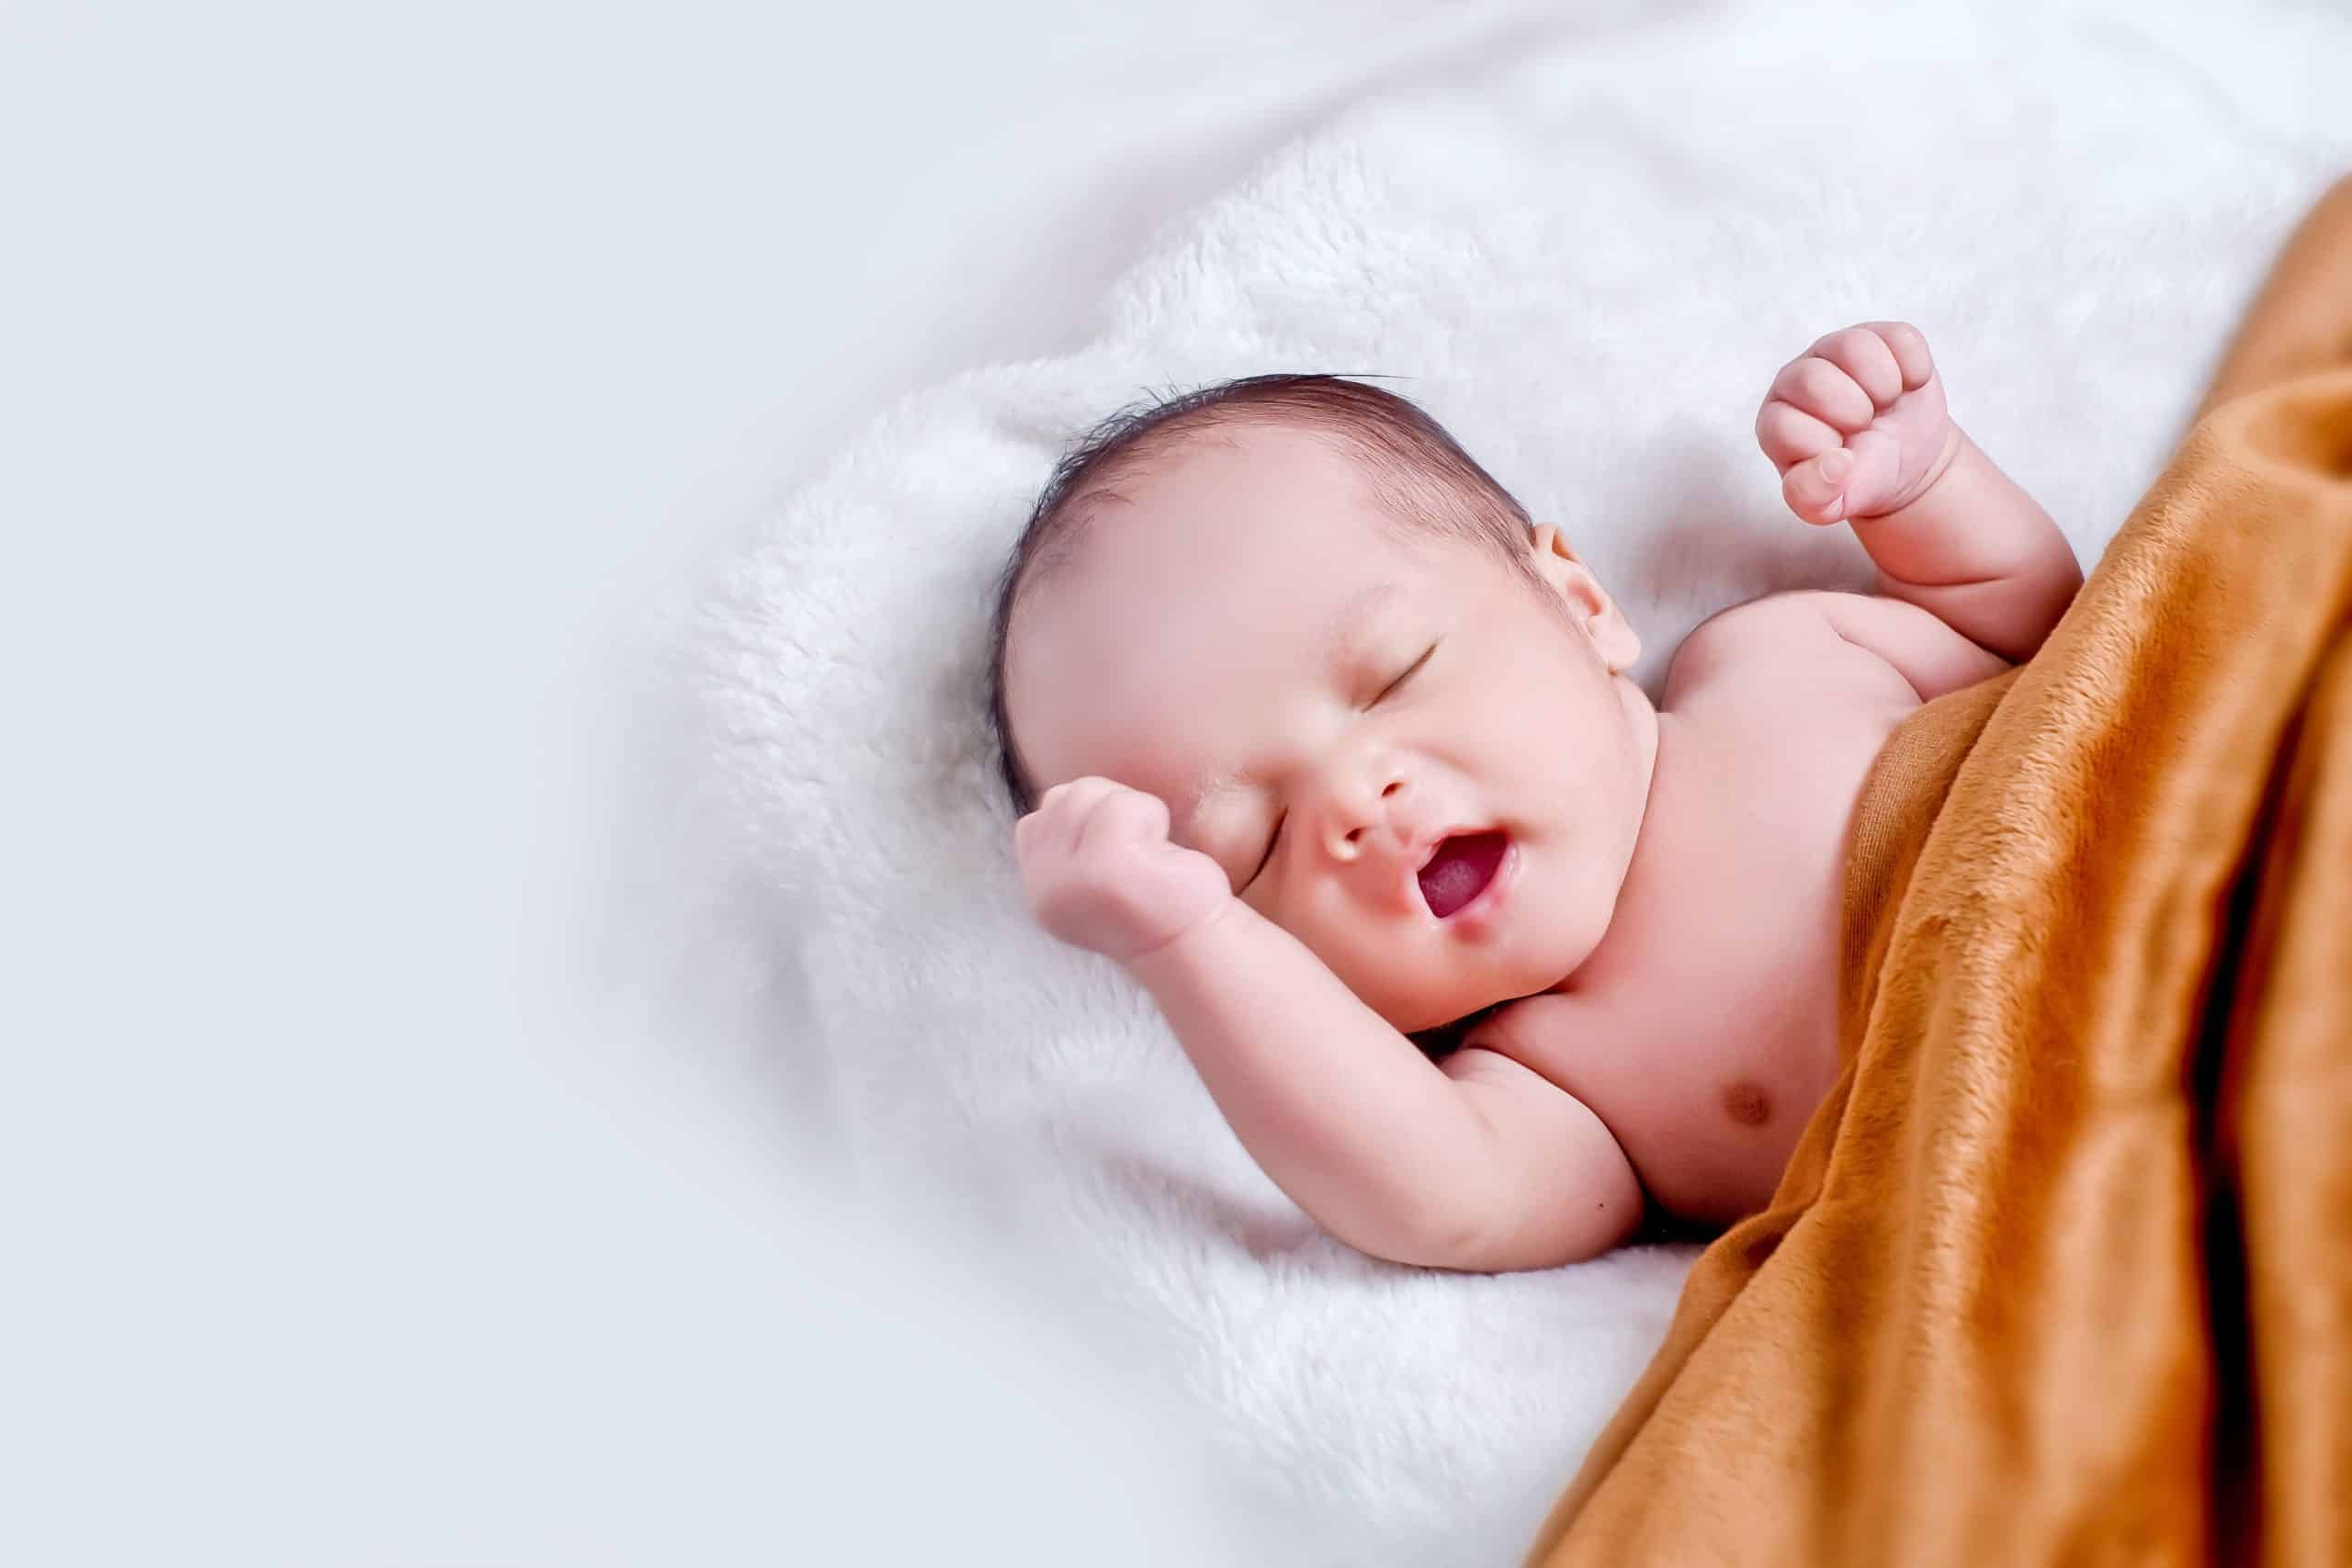 Baby Care: Why You Need Help With Baby Care